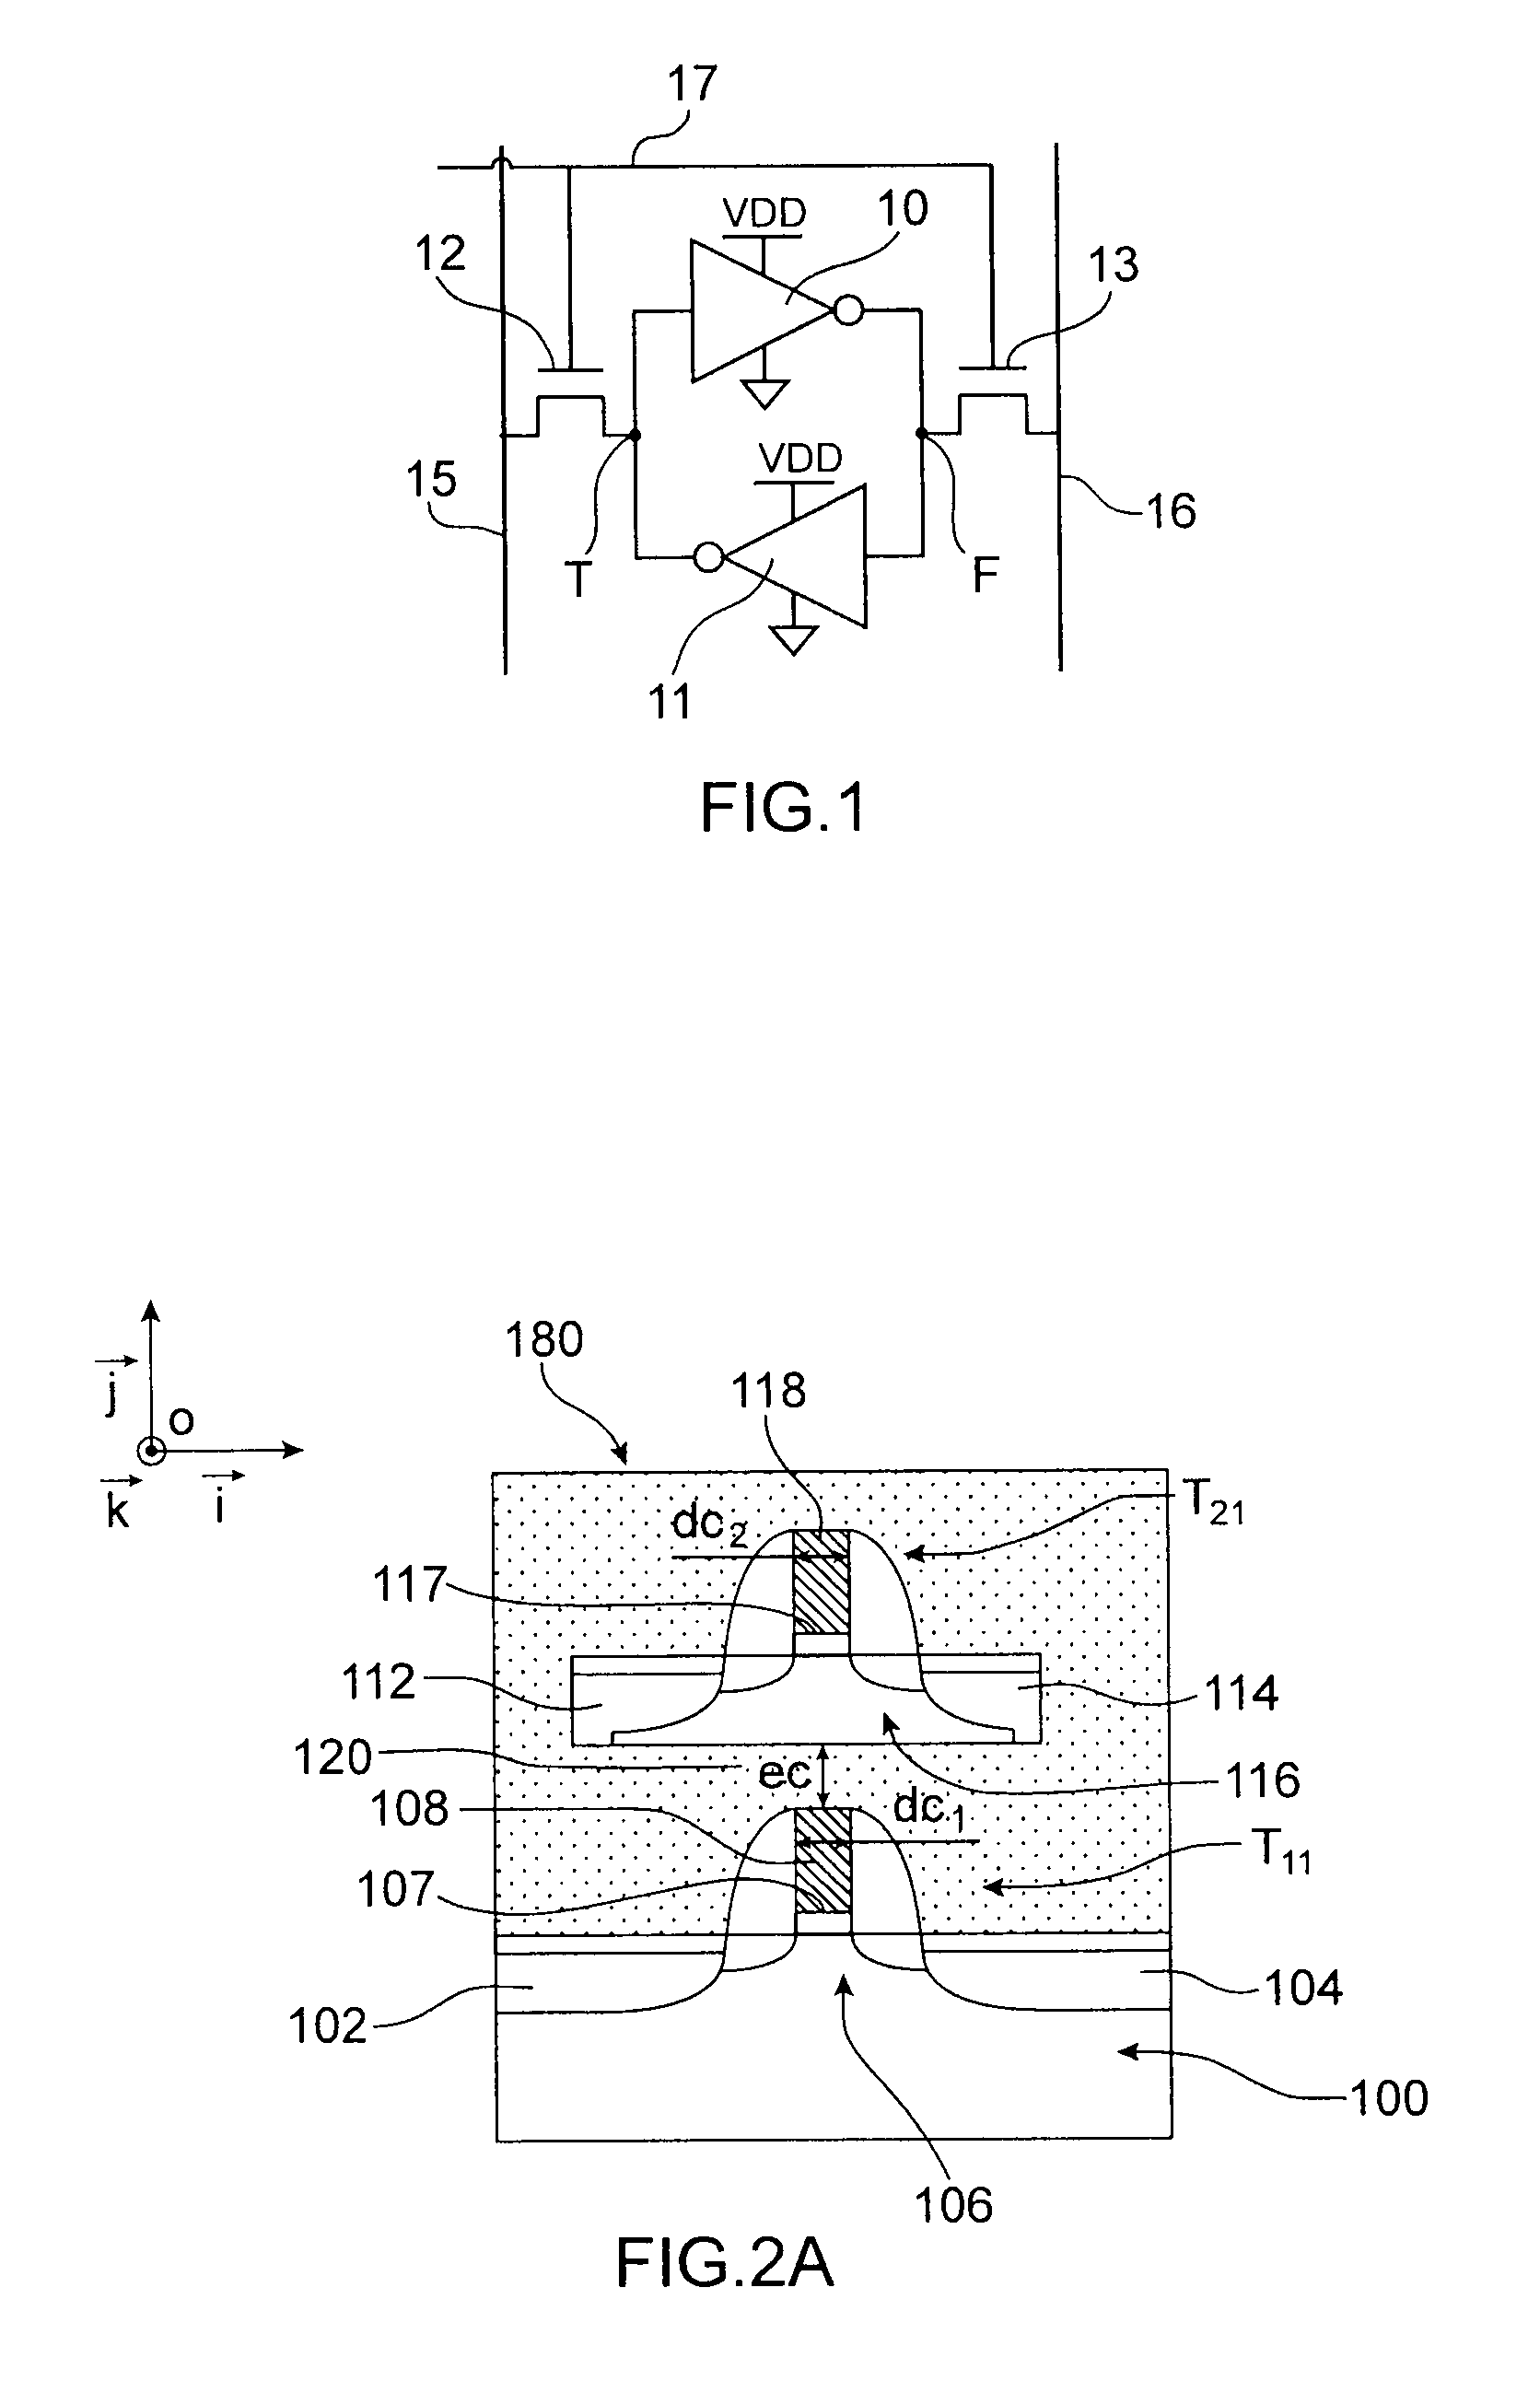 SRAM memory cell having transistors integrated at several levels and the threshold voltage vt of which is dynamically adjustable